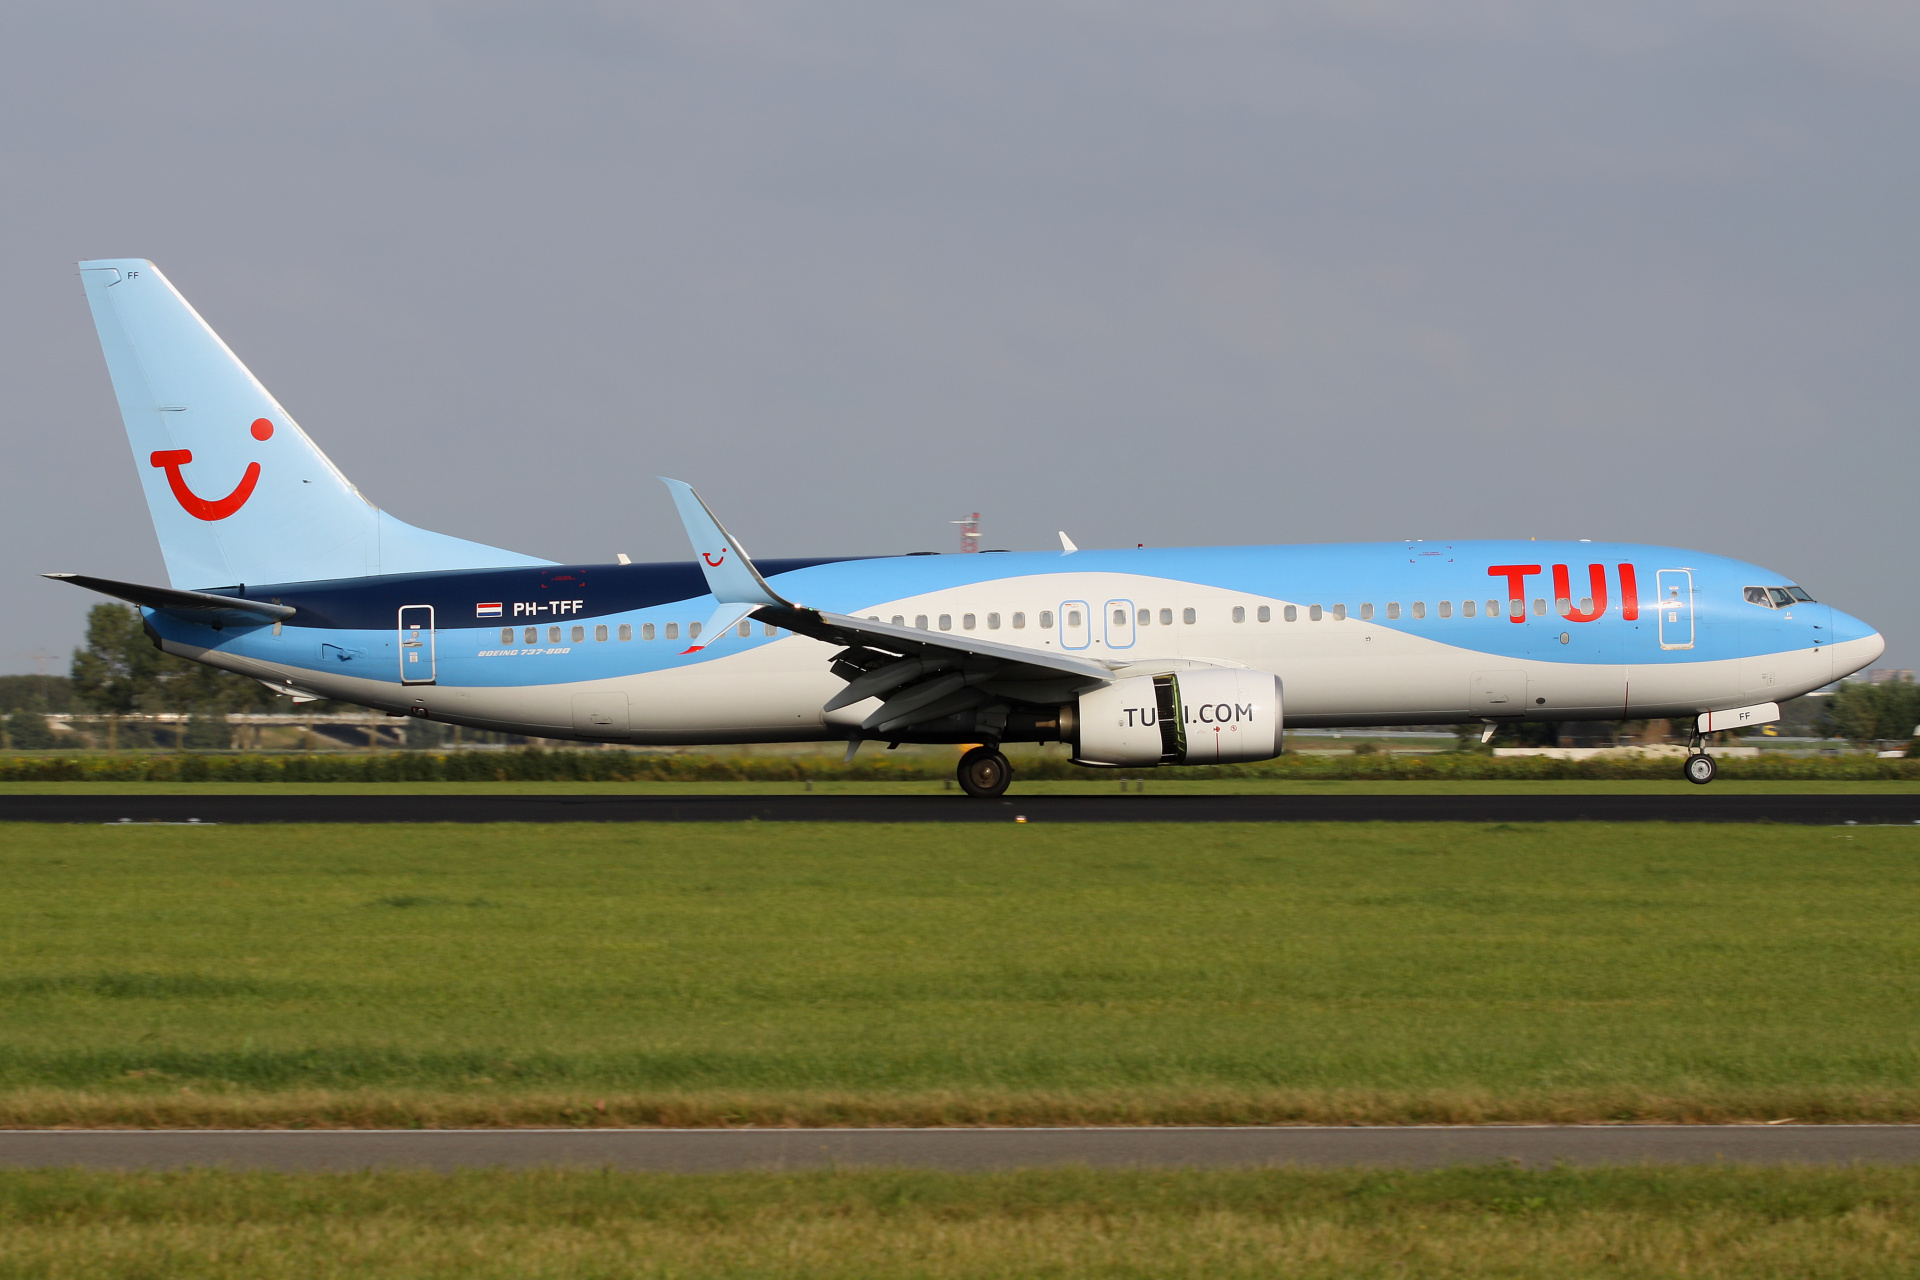 PH-TFF, TUI fly Netherlands (Aircraft » Schiphol Spotting » Boeing 737-800)